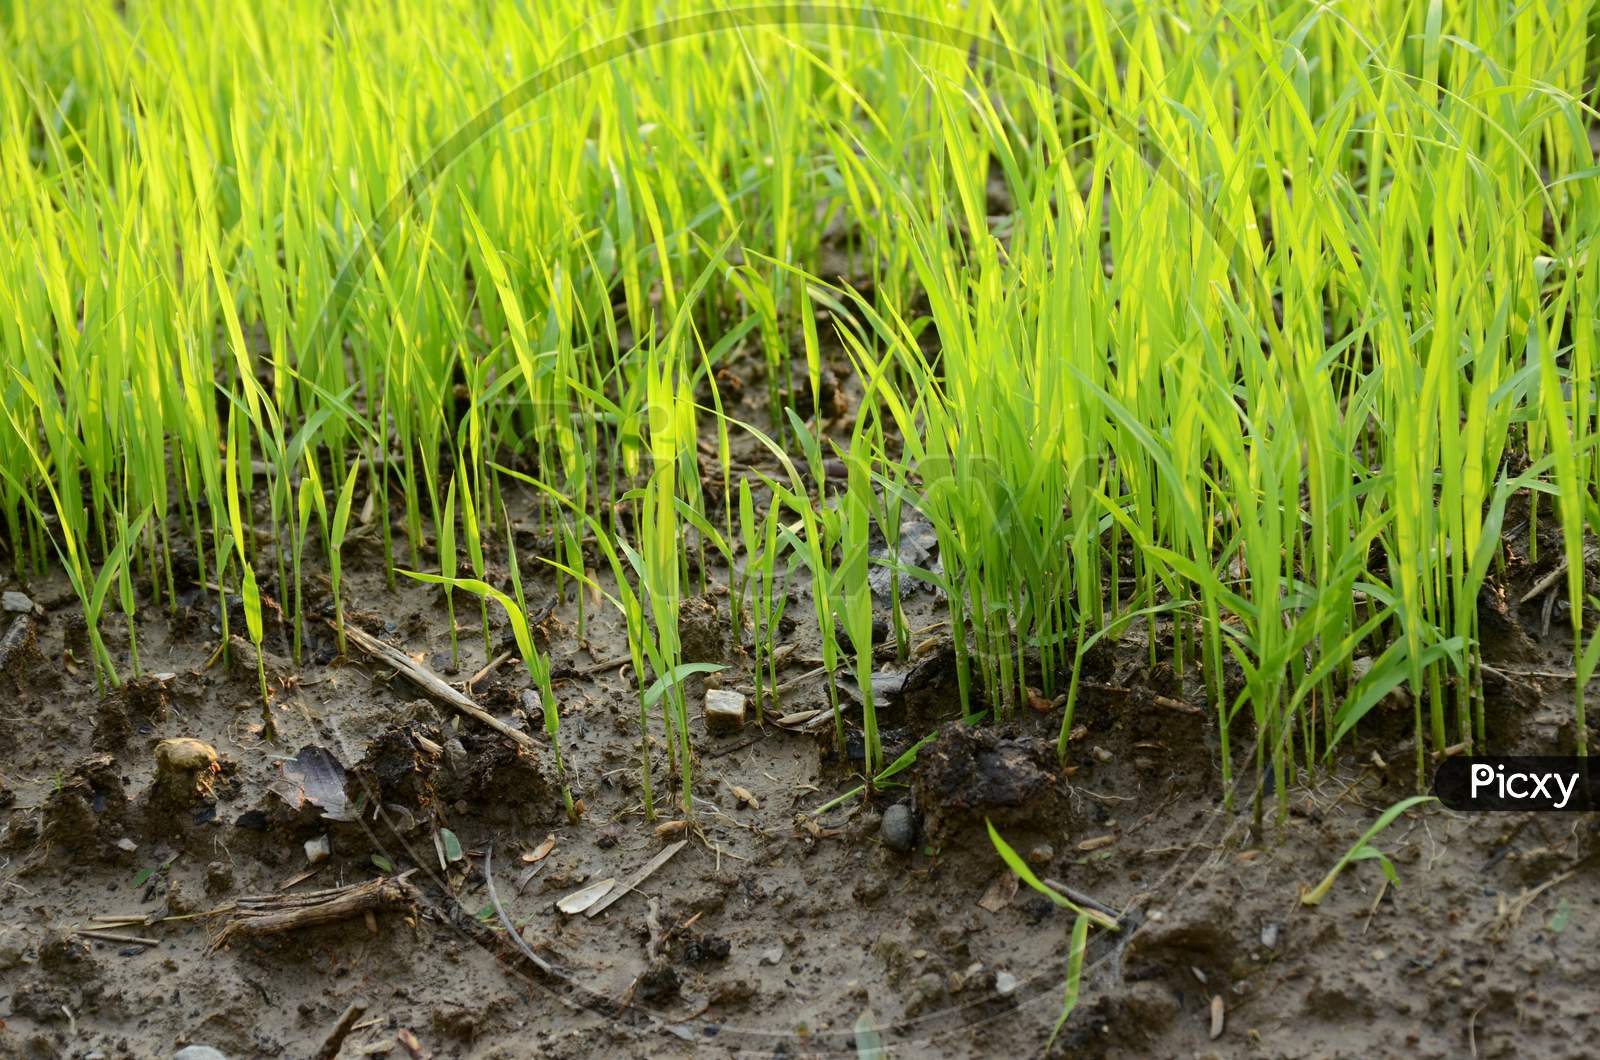 Closeup The Green Ripe Paddy Plant Soil Heap In The Farm Over Out Of Focus Green Brown Background.